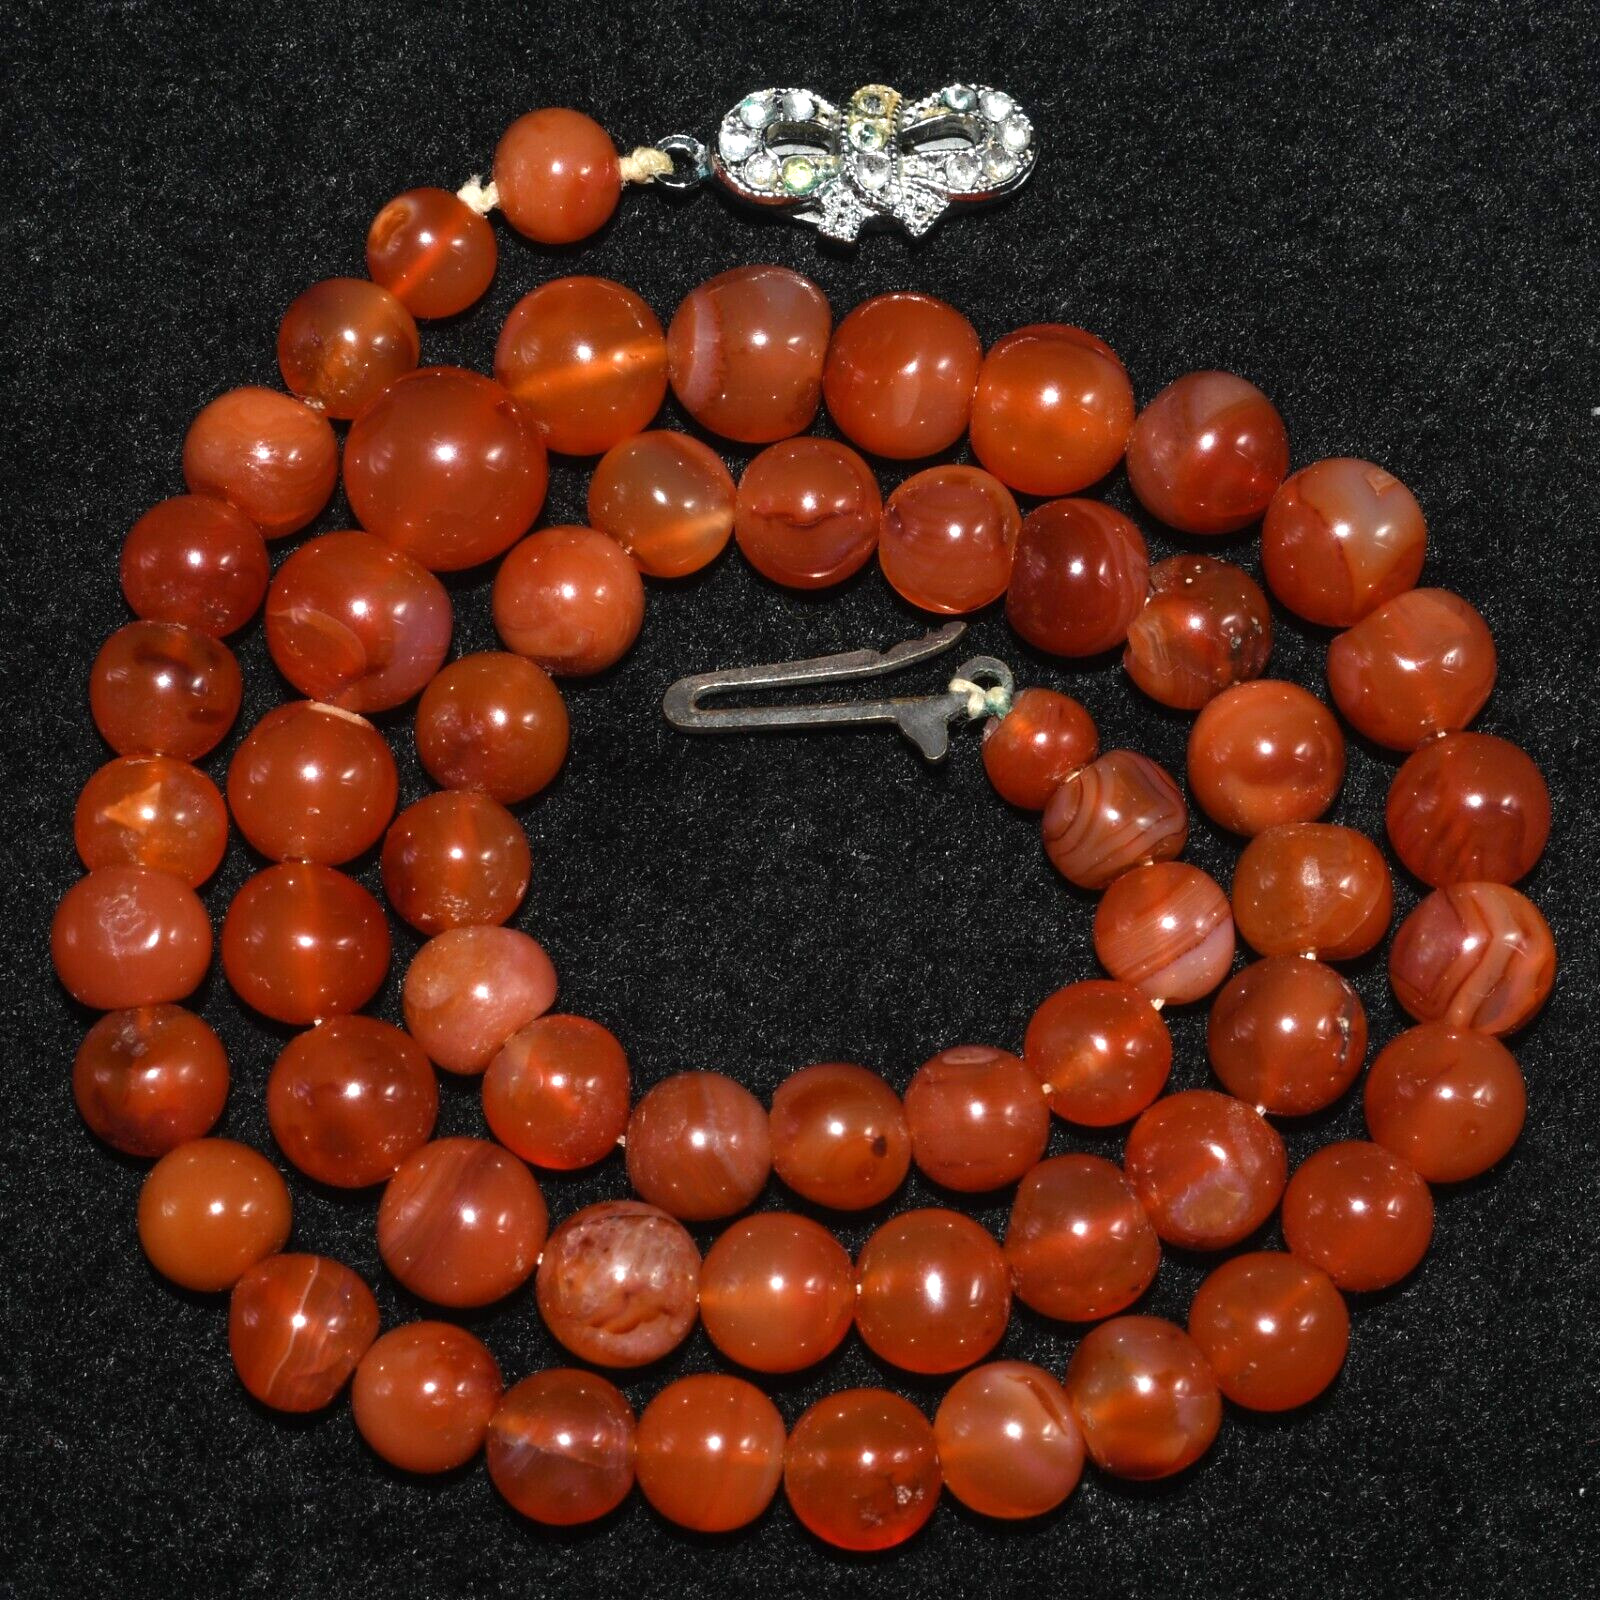 Genuine Ancient Old Round Natural Carnelian Stone Bead Necklace from Afghanistan